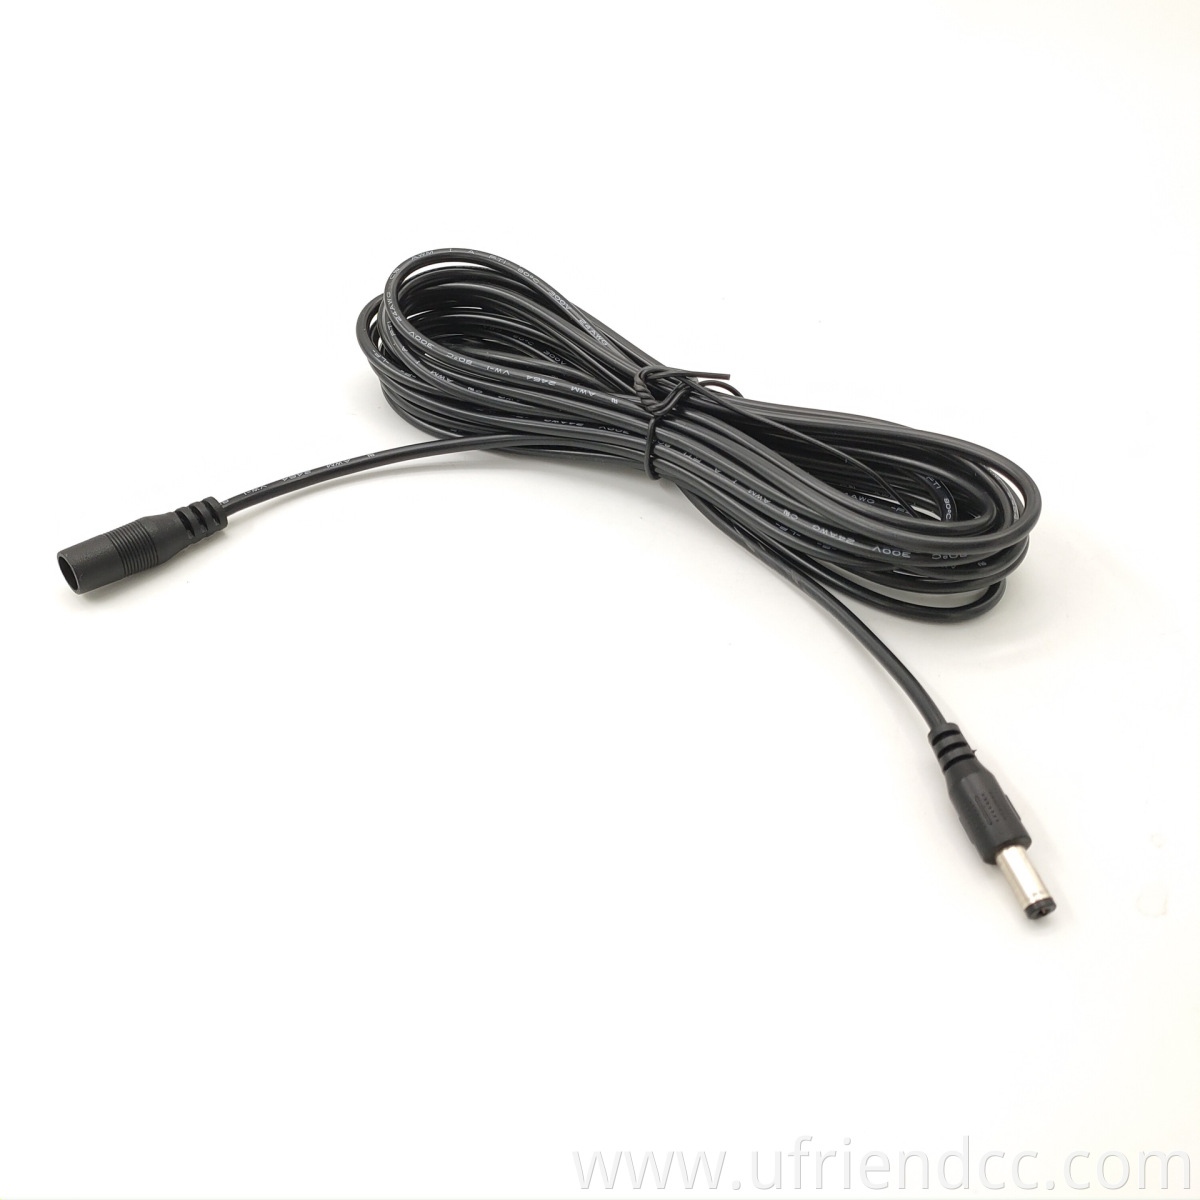 DC 5525 5521 5v 12 v 18 Awg 24 AWG 28 AWG Female to Male Extension DC Power Cable